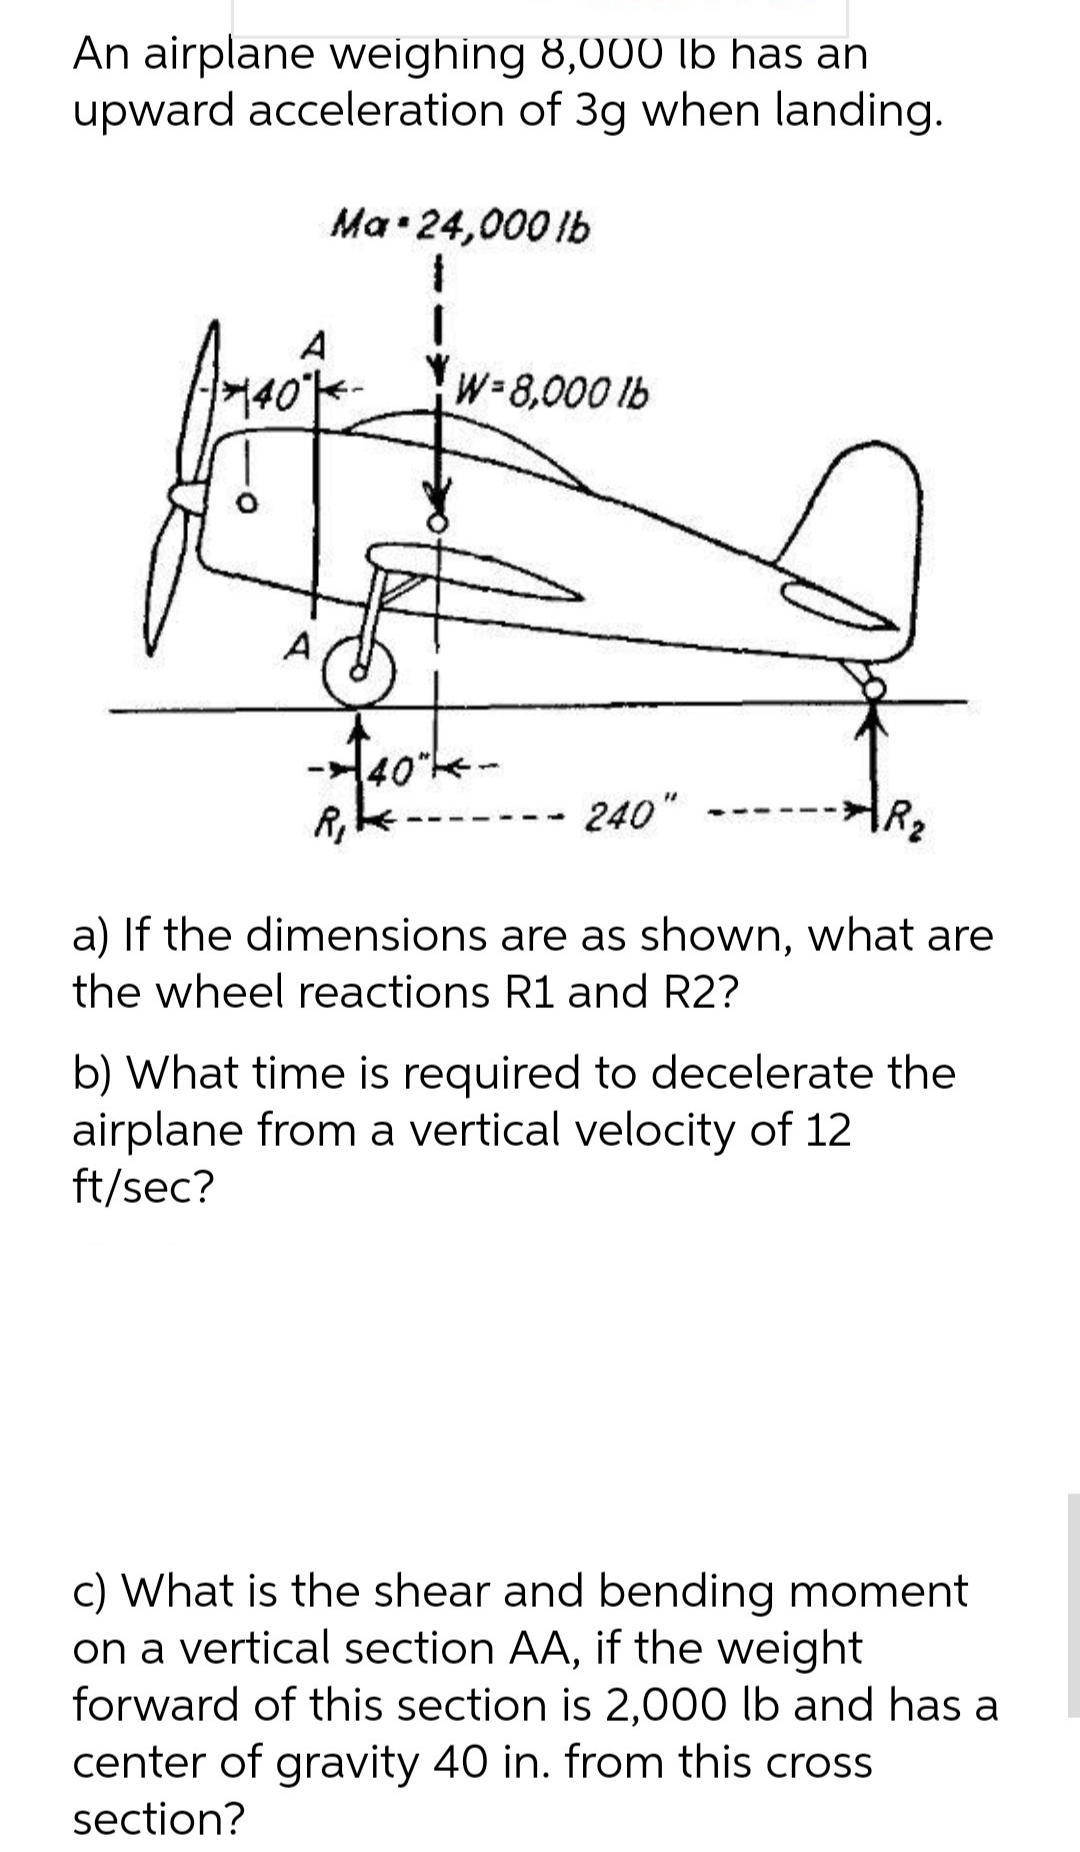 An airplane weighing 8,000 lb has an
upward acceleration of 3g when landing.
Ma•24,000 lb
W-8,000 lb
A
240"
-- --
a) If the dimensions are as shown, what are
the wheel reactions R1 and R2?
b) What time is required to decelerate the
airplane from a vertical velocity of 12
ft/sec?
c) What is the shear and bending moment
on a vertical section AA, if the weight
forward of this section is 2,000 lb and has a
center of gravity 40 in. from this cross
section?
